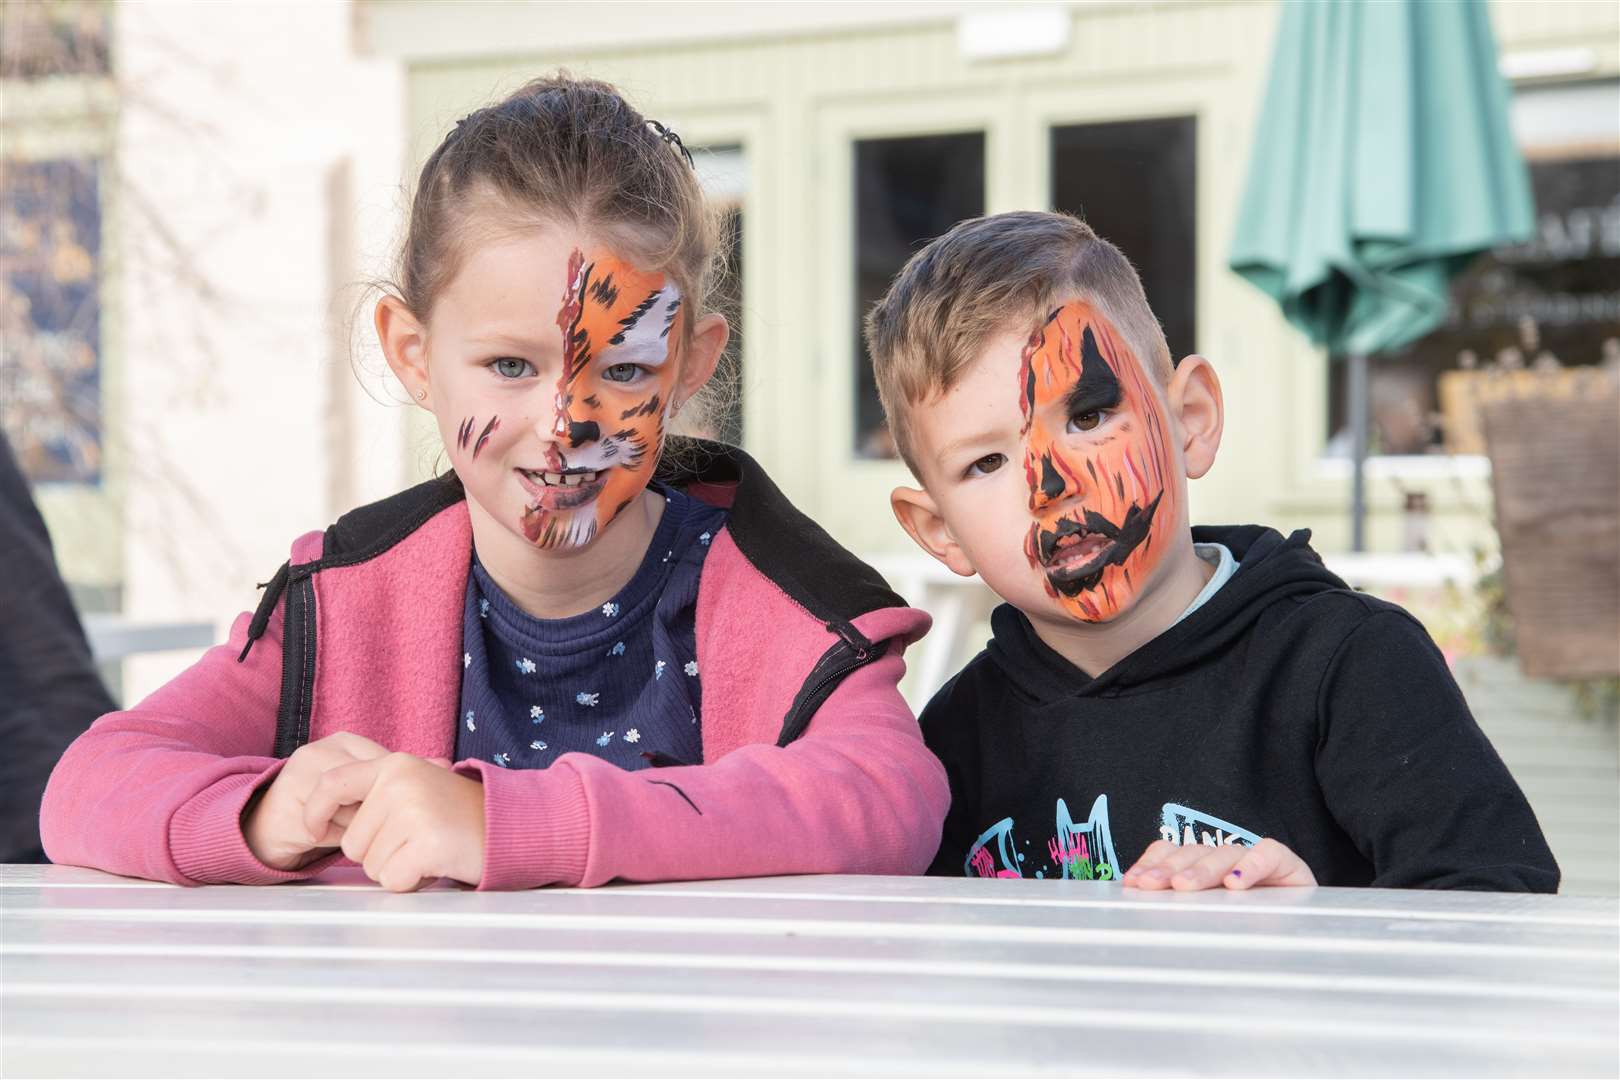 Jessica and Jacob Drover's scary faces. Picture: Daniel Forsyth